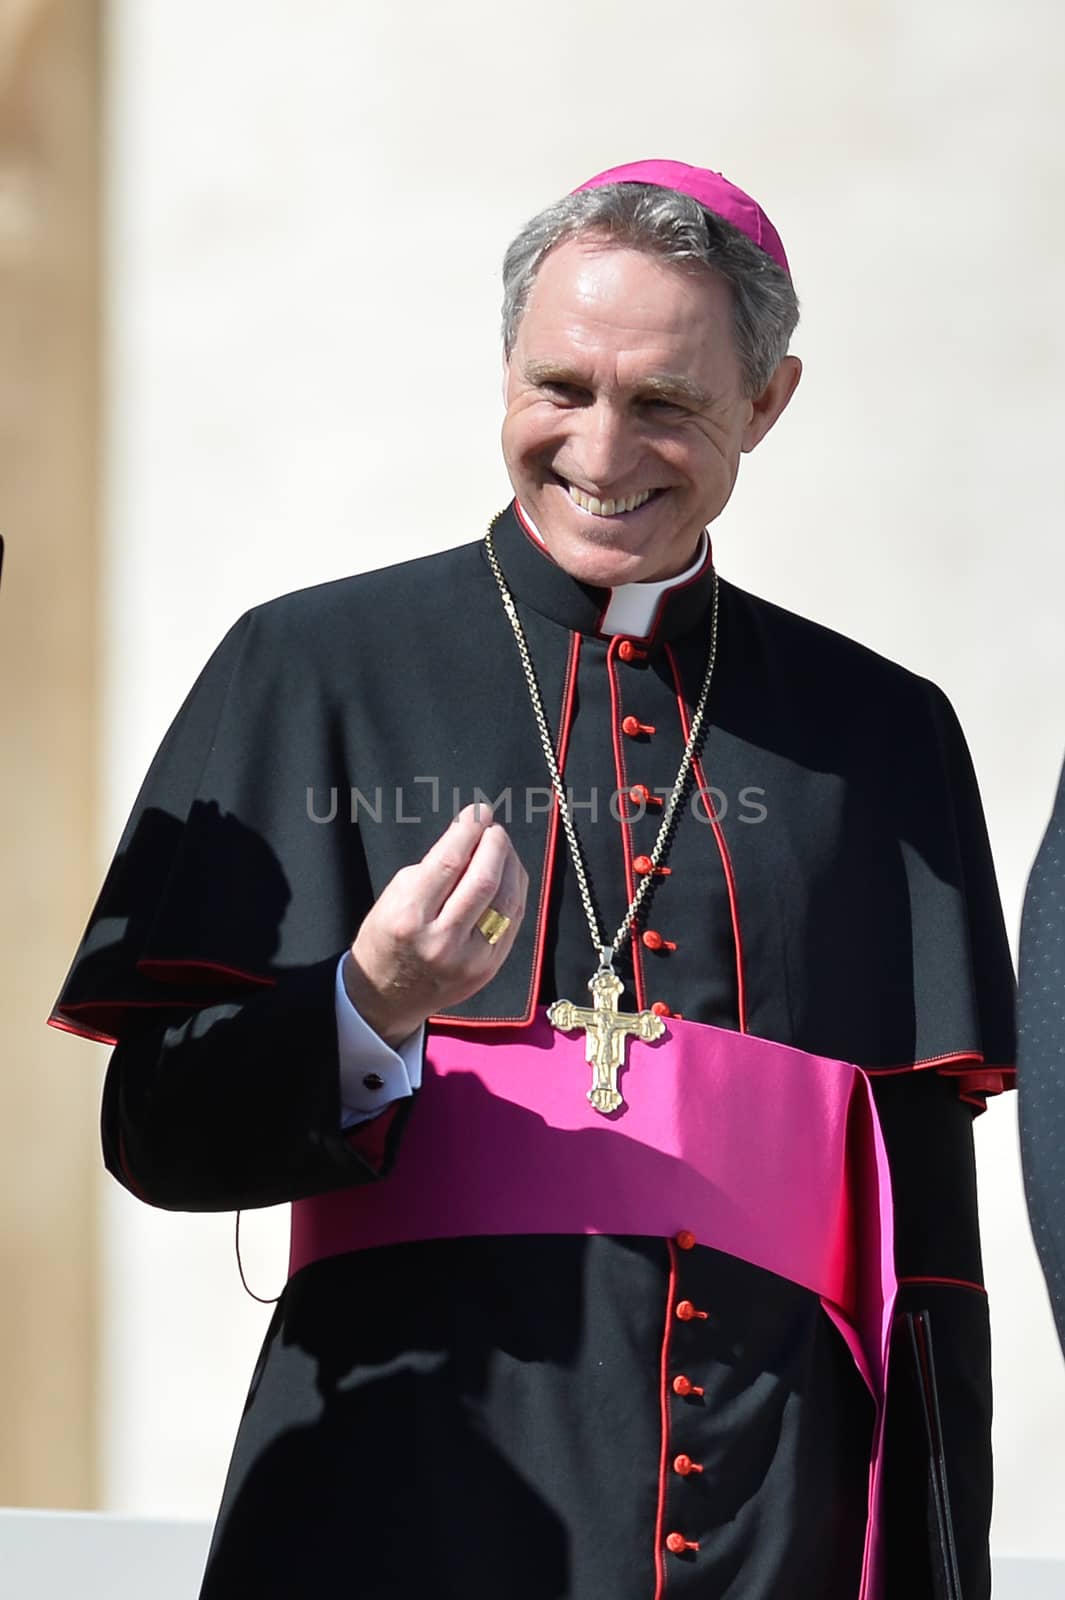 VATICAN: German Archbishop of the Catholic Church Georg Gänswein attends during the Pope's weekly general audience in St. Peter's Square at the Vatican on March 2, 2016. 